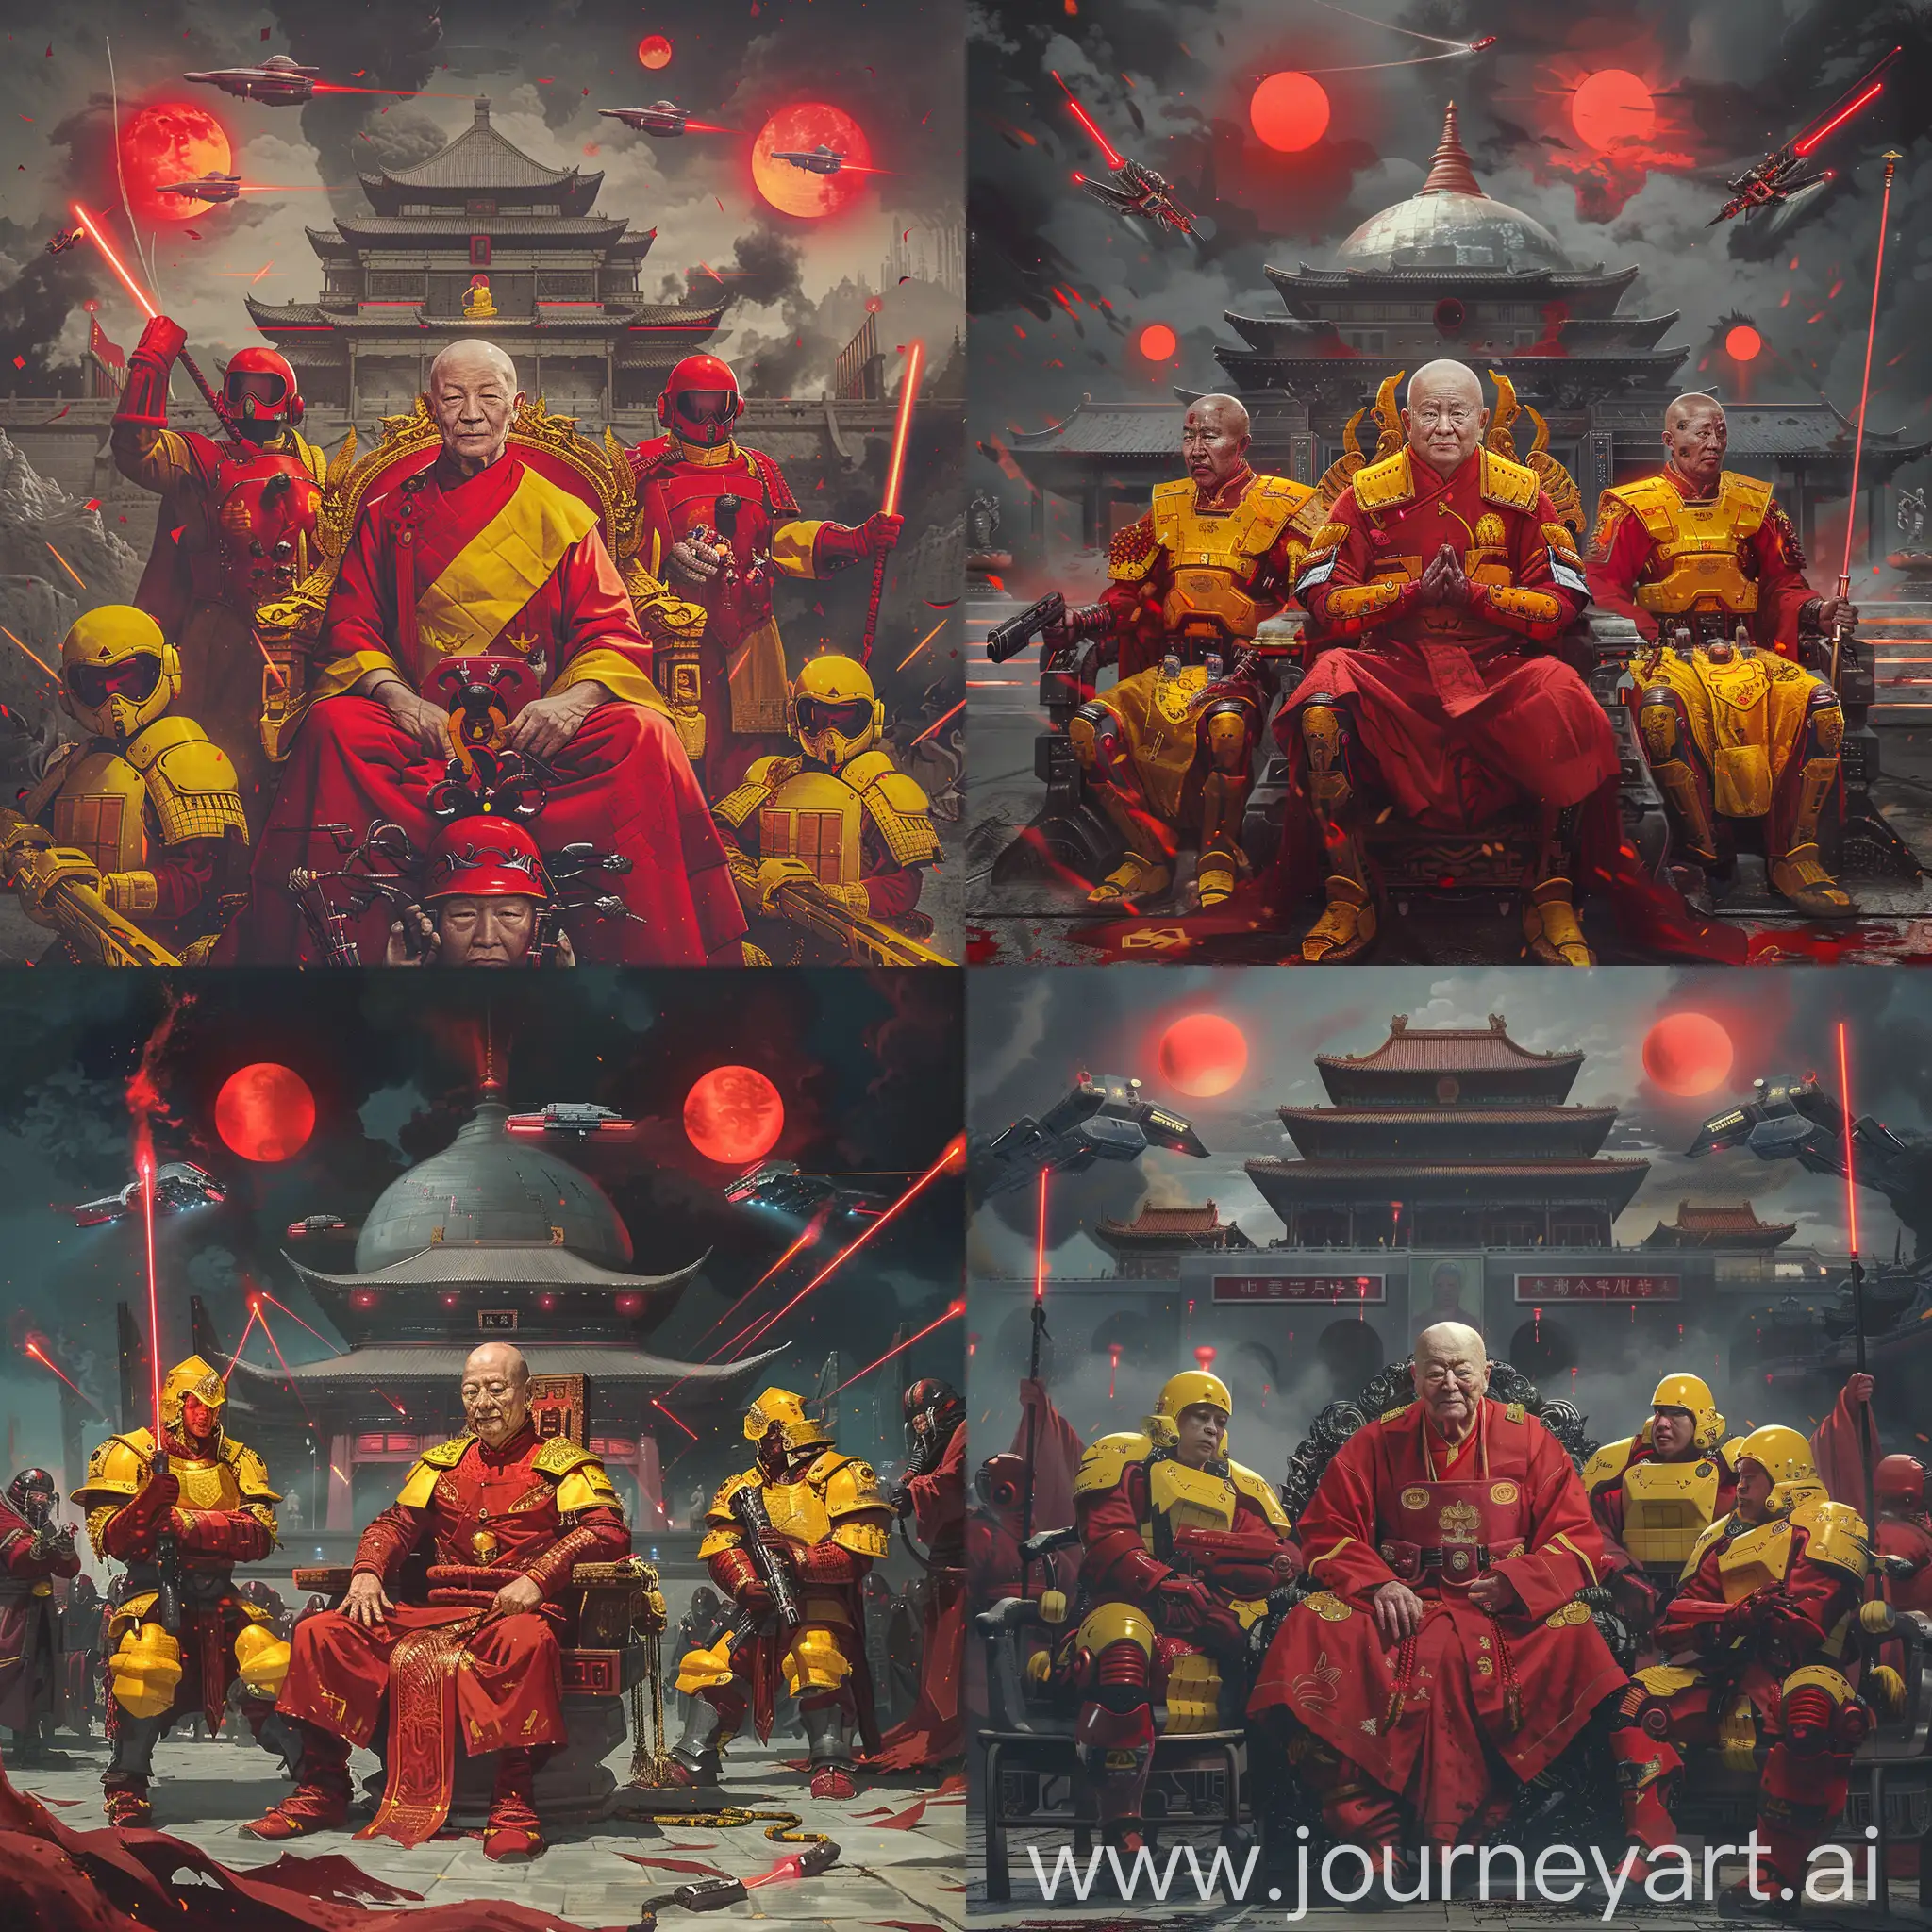 in the middle, a middle-aged Chinese Buddhist monk senior, he is kind and elegant, in red and yellow Chinese Buddhist style space marine armor, sits on his lotus royal throne,

medieval Chinese Buddhist  cyborgs monk soldiers in yellow red armor are next to the senior, they hold laser spears,

a futuristic steel gray Chinese Buddhist temple is in the background,

three red suns in the dark sky, with Chinese Buddhist style Spaceships in the sky,